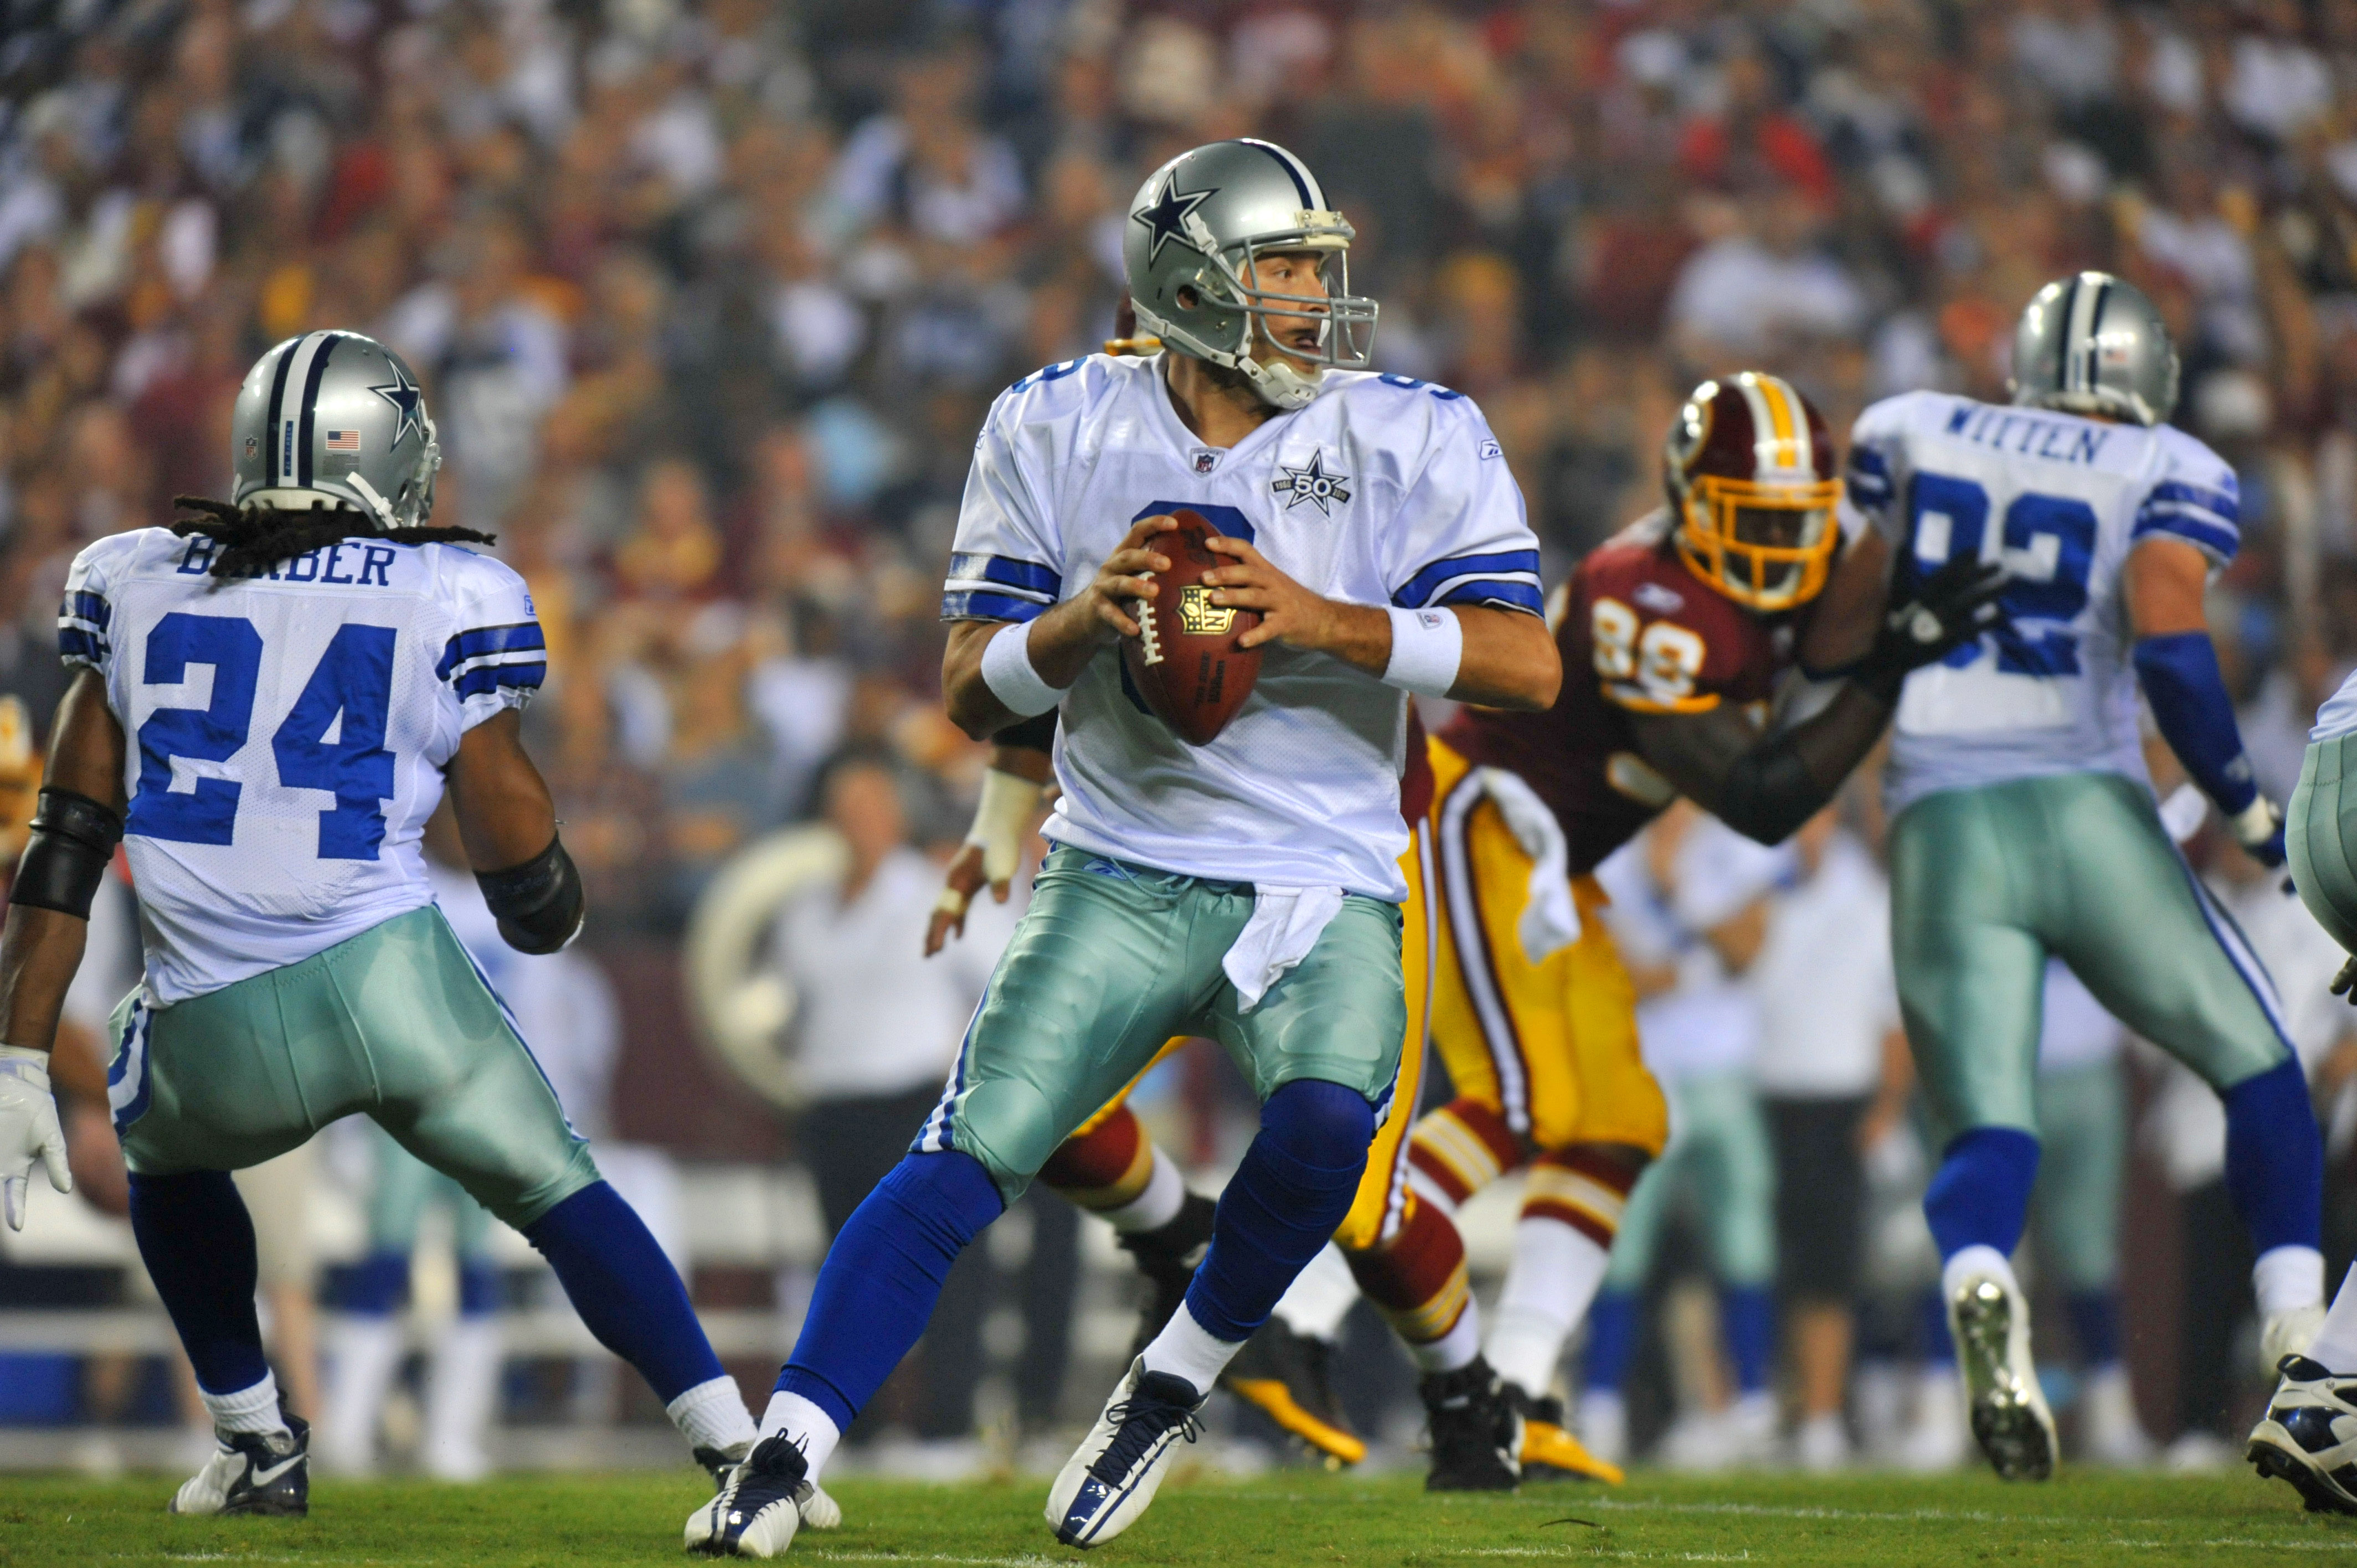 LANDOVER - SEPTEMBER 12:  Tony Romo #9 of the Dallas Cowboys looks to pass during the NFL season opener against the Washington Redskins at FedExField on September 12, 2010 in Landover, Maryland.  (Photo by Larry French/Getty Images)